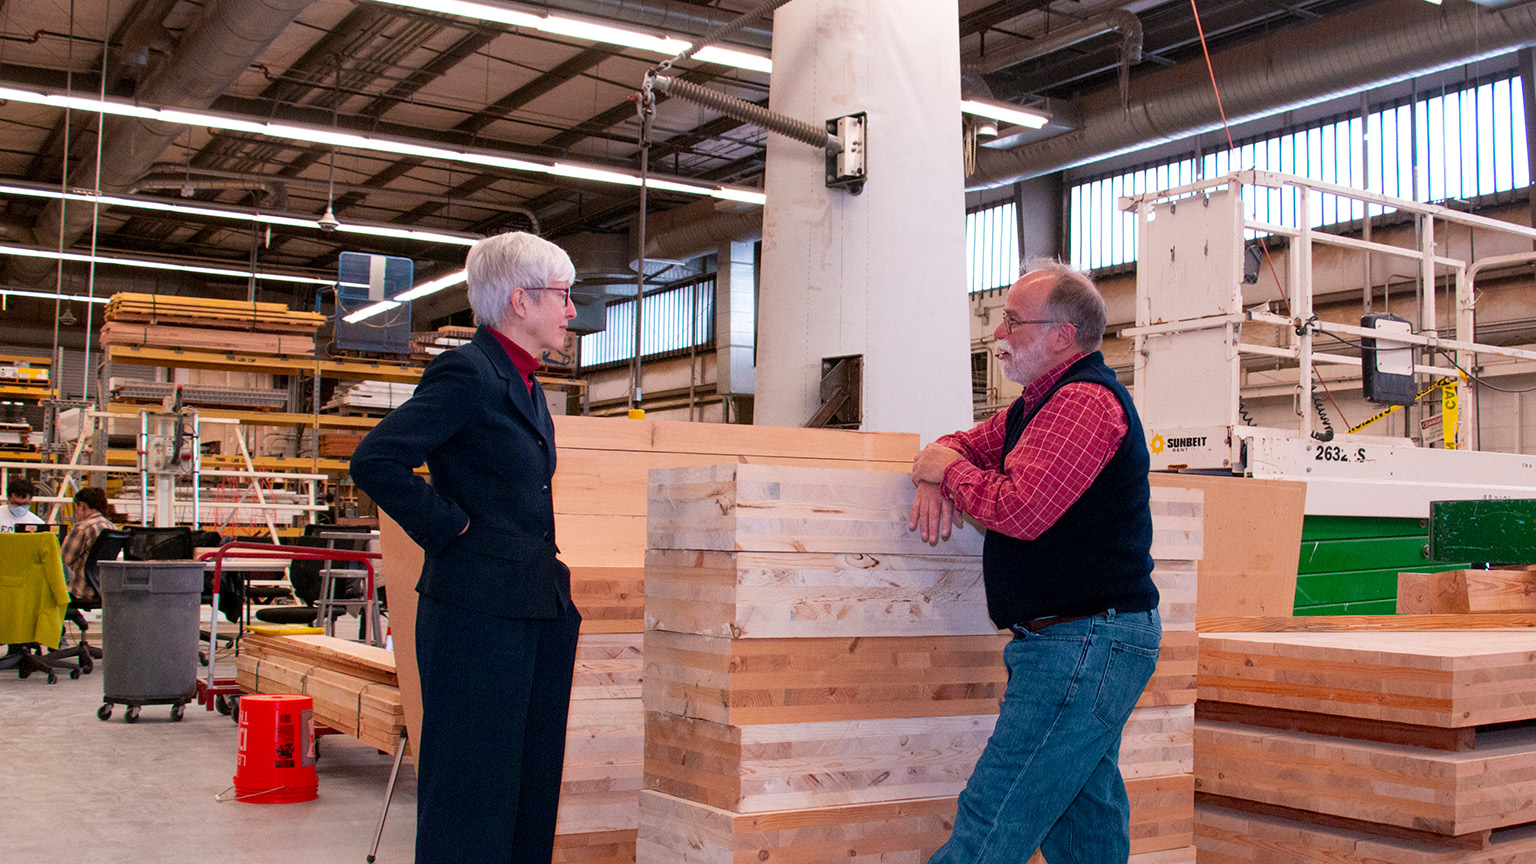 Valerie Thomas and Russell Gentry in front of mass timber components